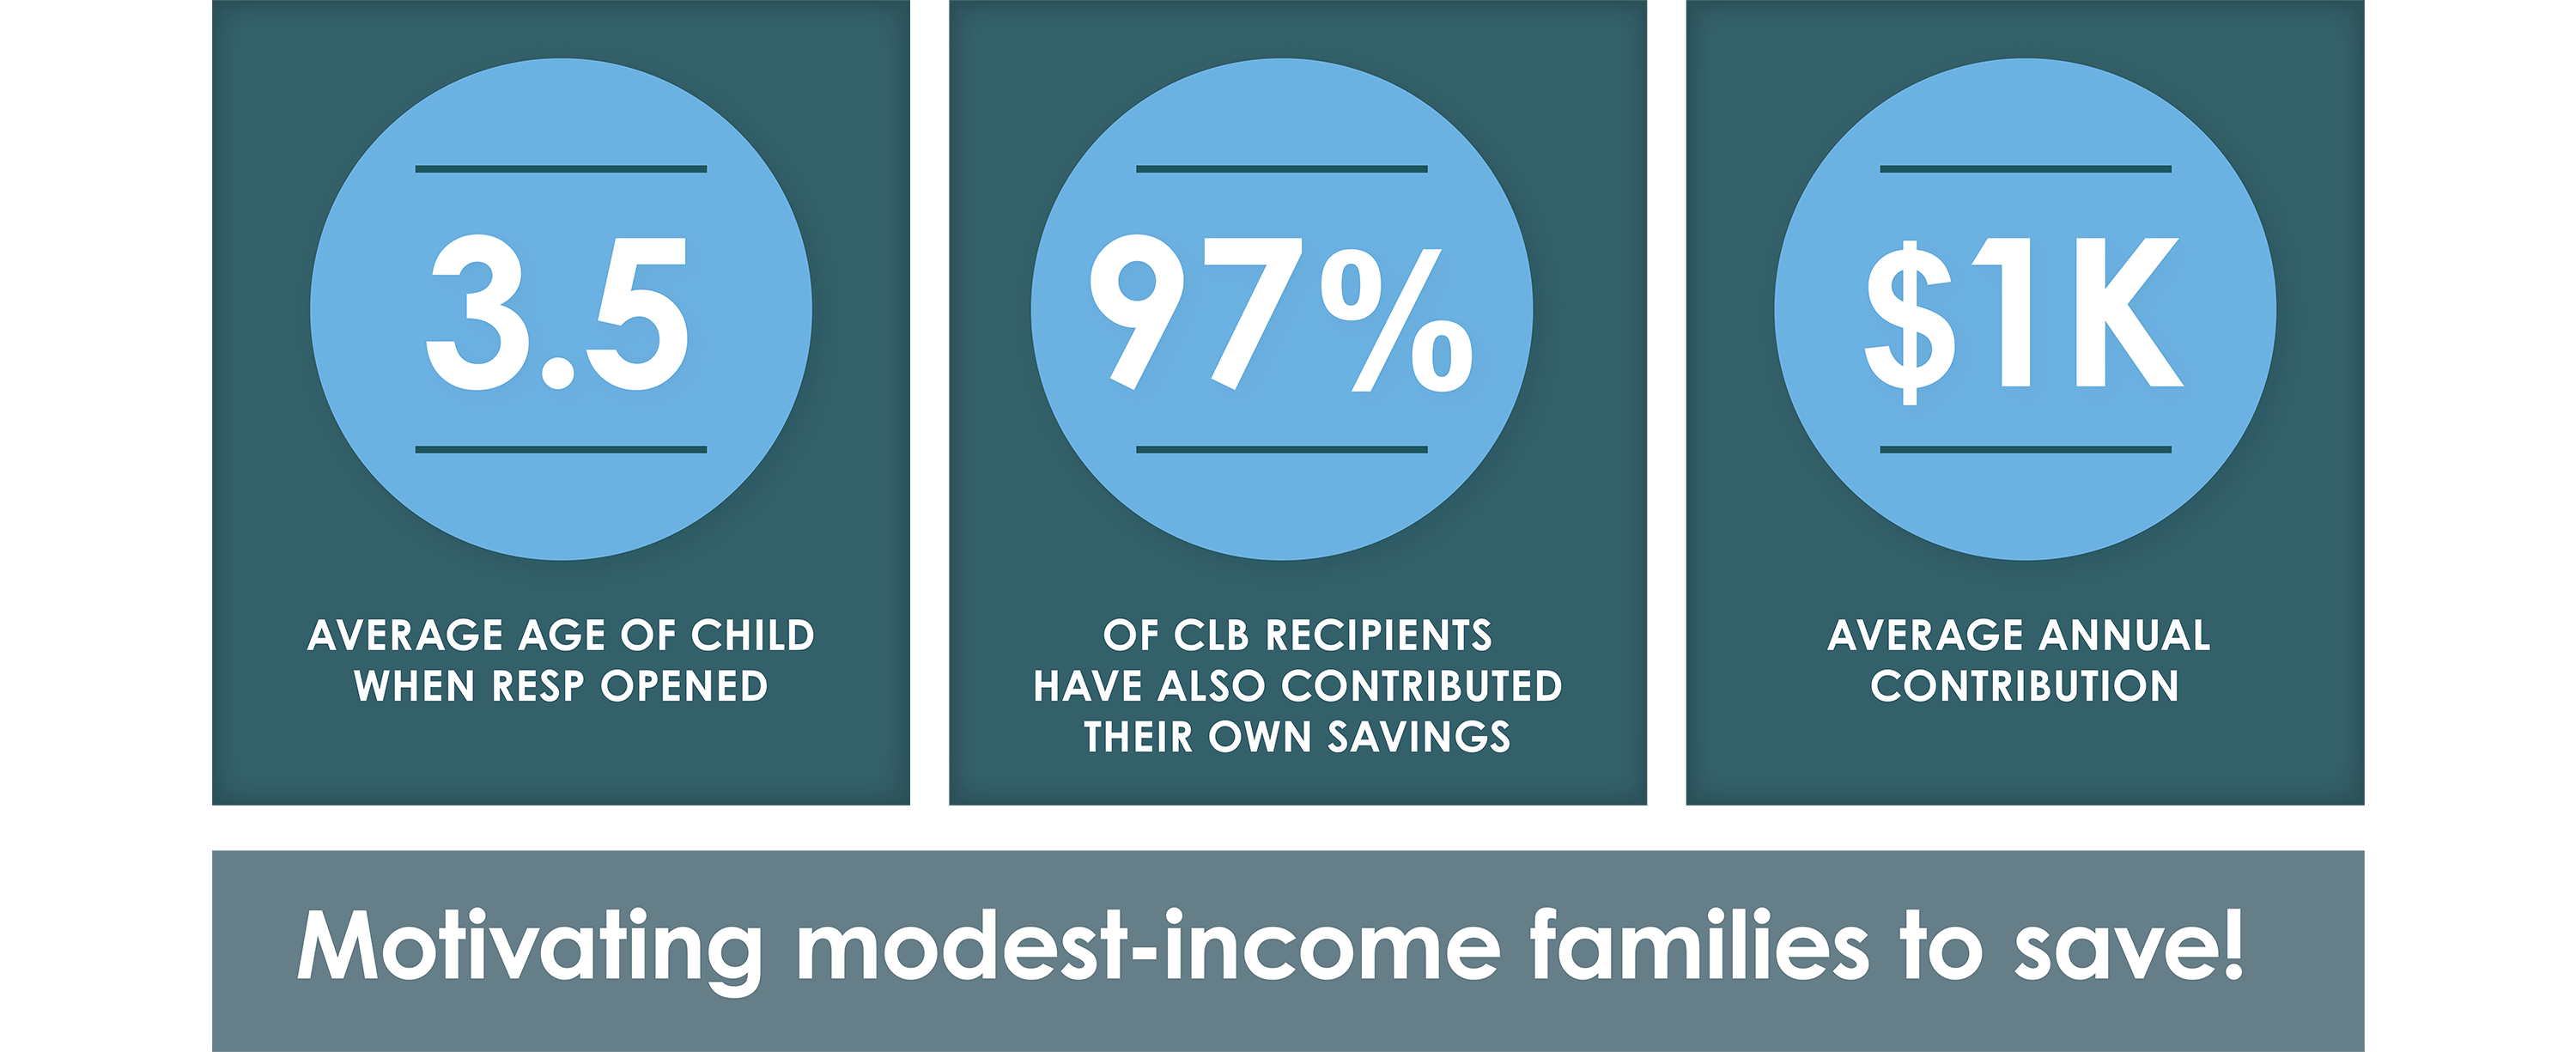 Motivating modest-income families to save!